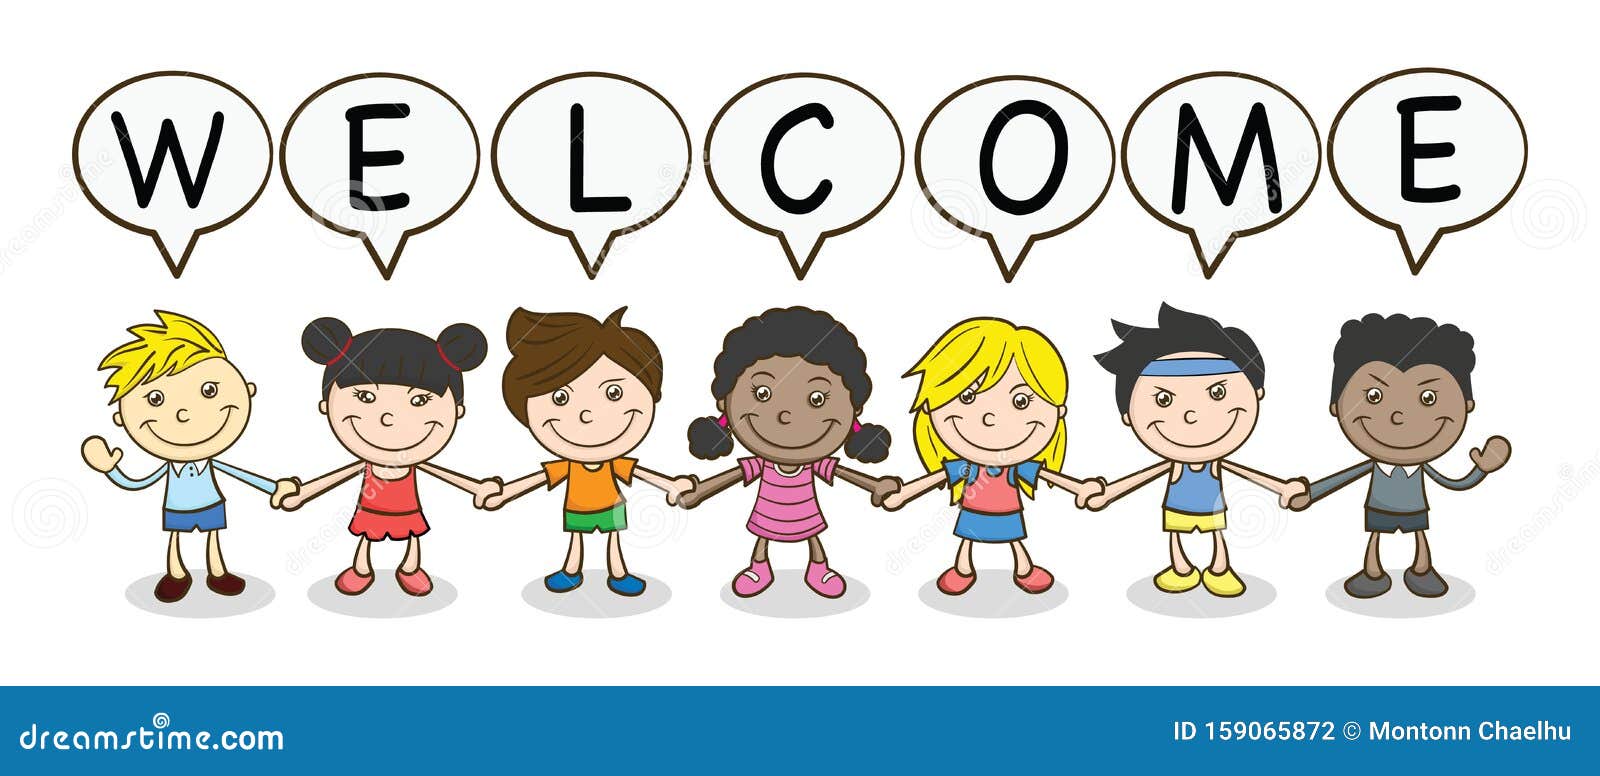 Welcome Cartoon Images